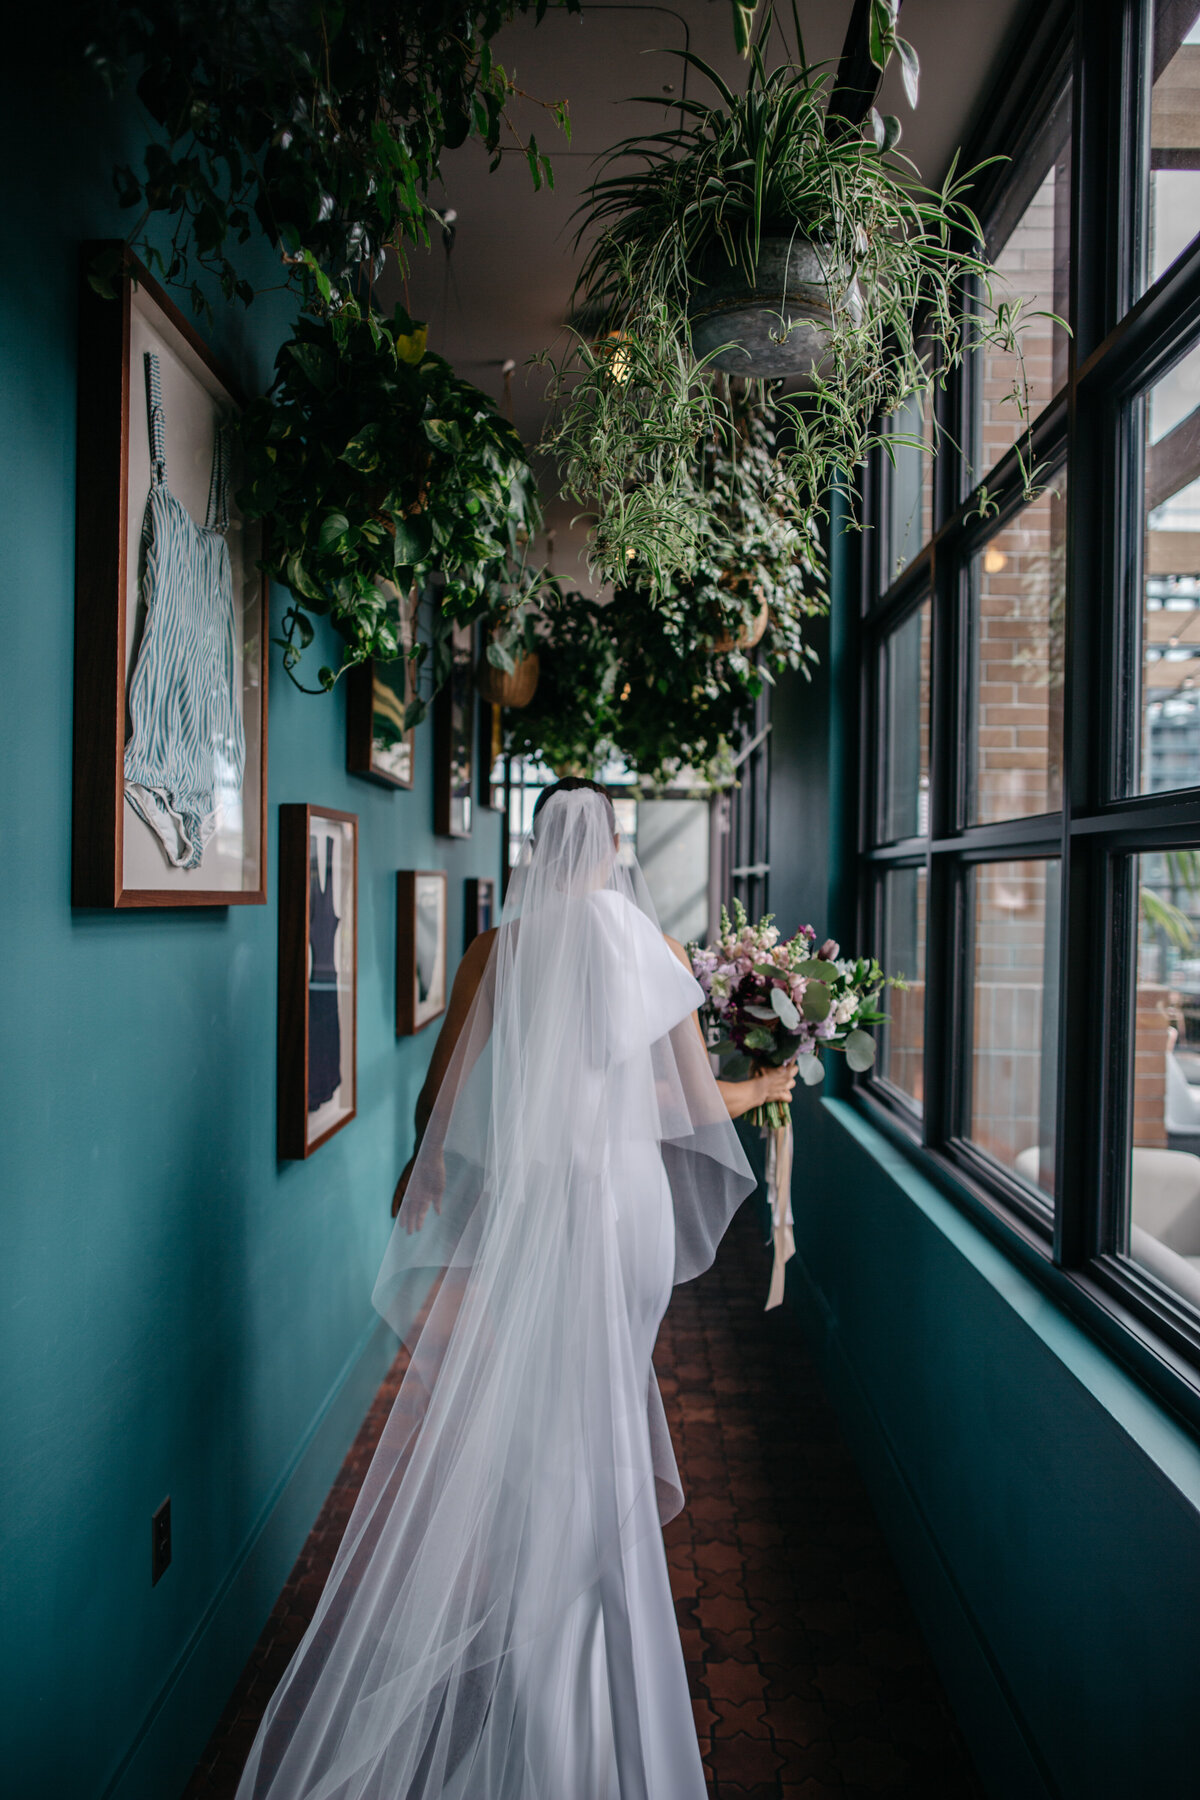 Bride walking down hallway decorated with hanging plants in route to first look